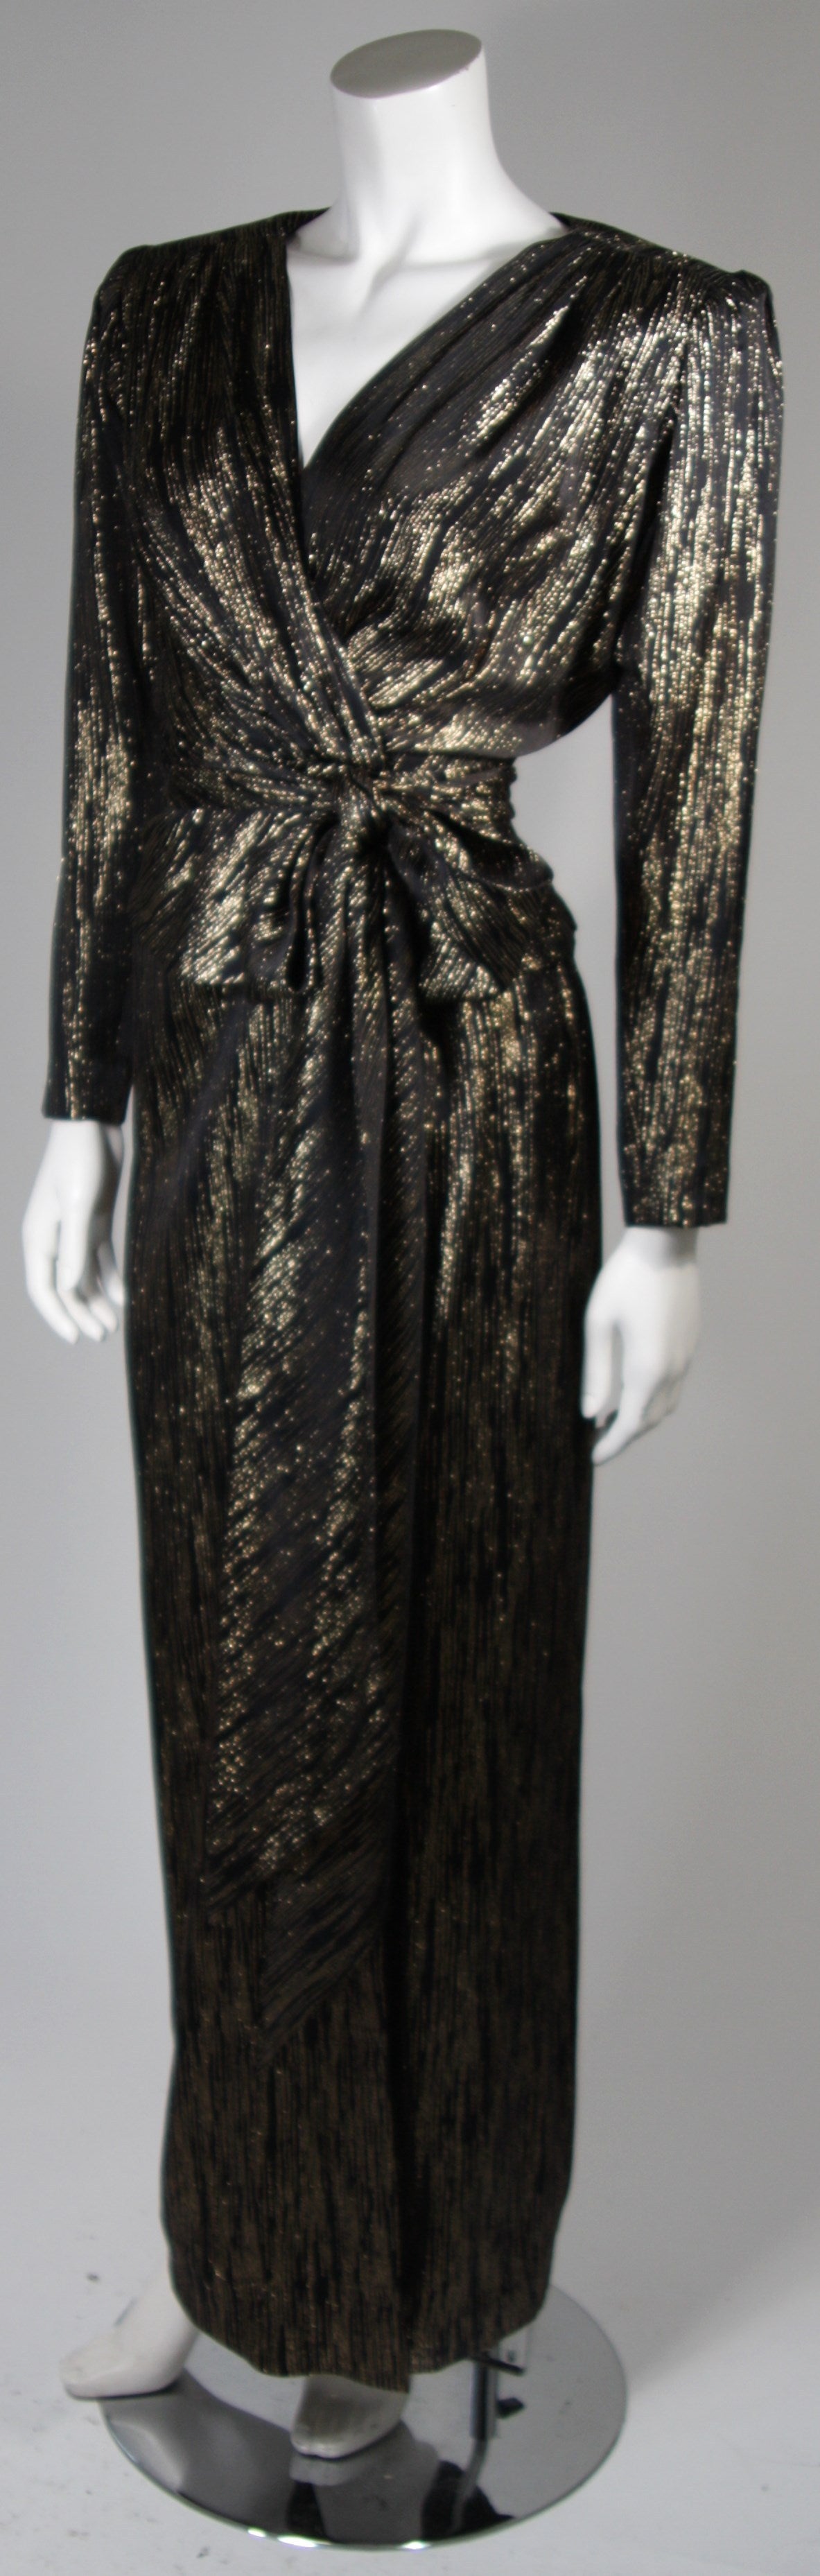 Women's Nolan Miller Attributed Black and Gold Lame Ensemble Size Small